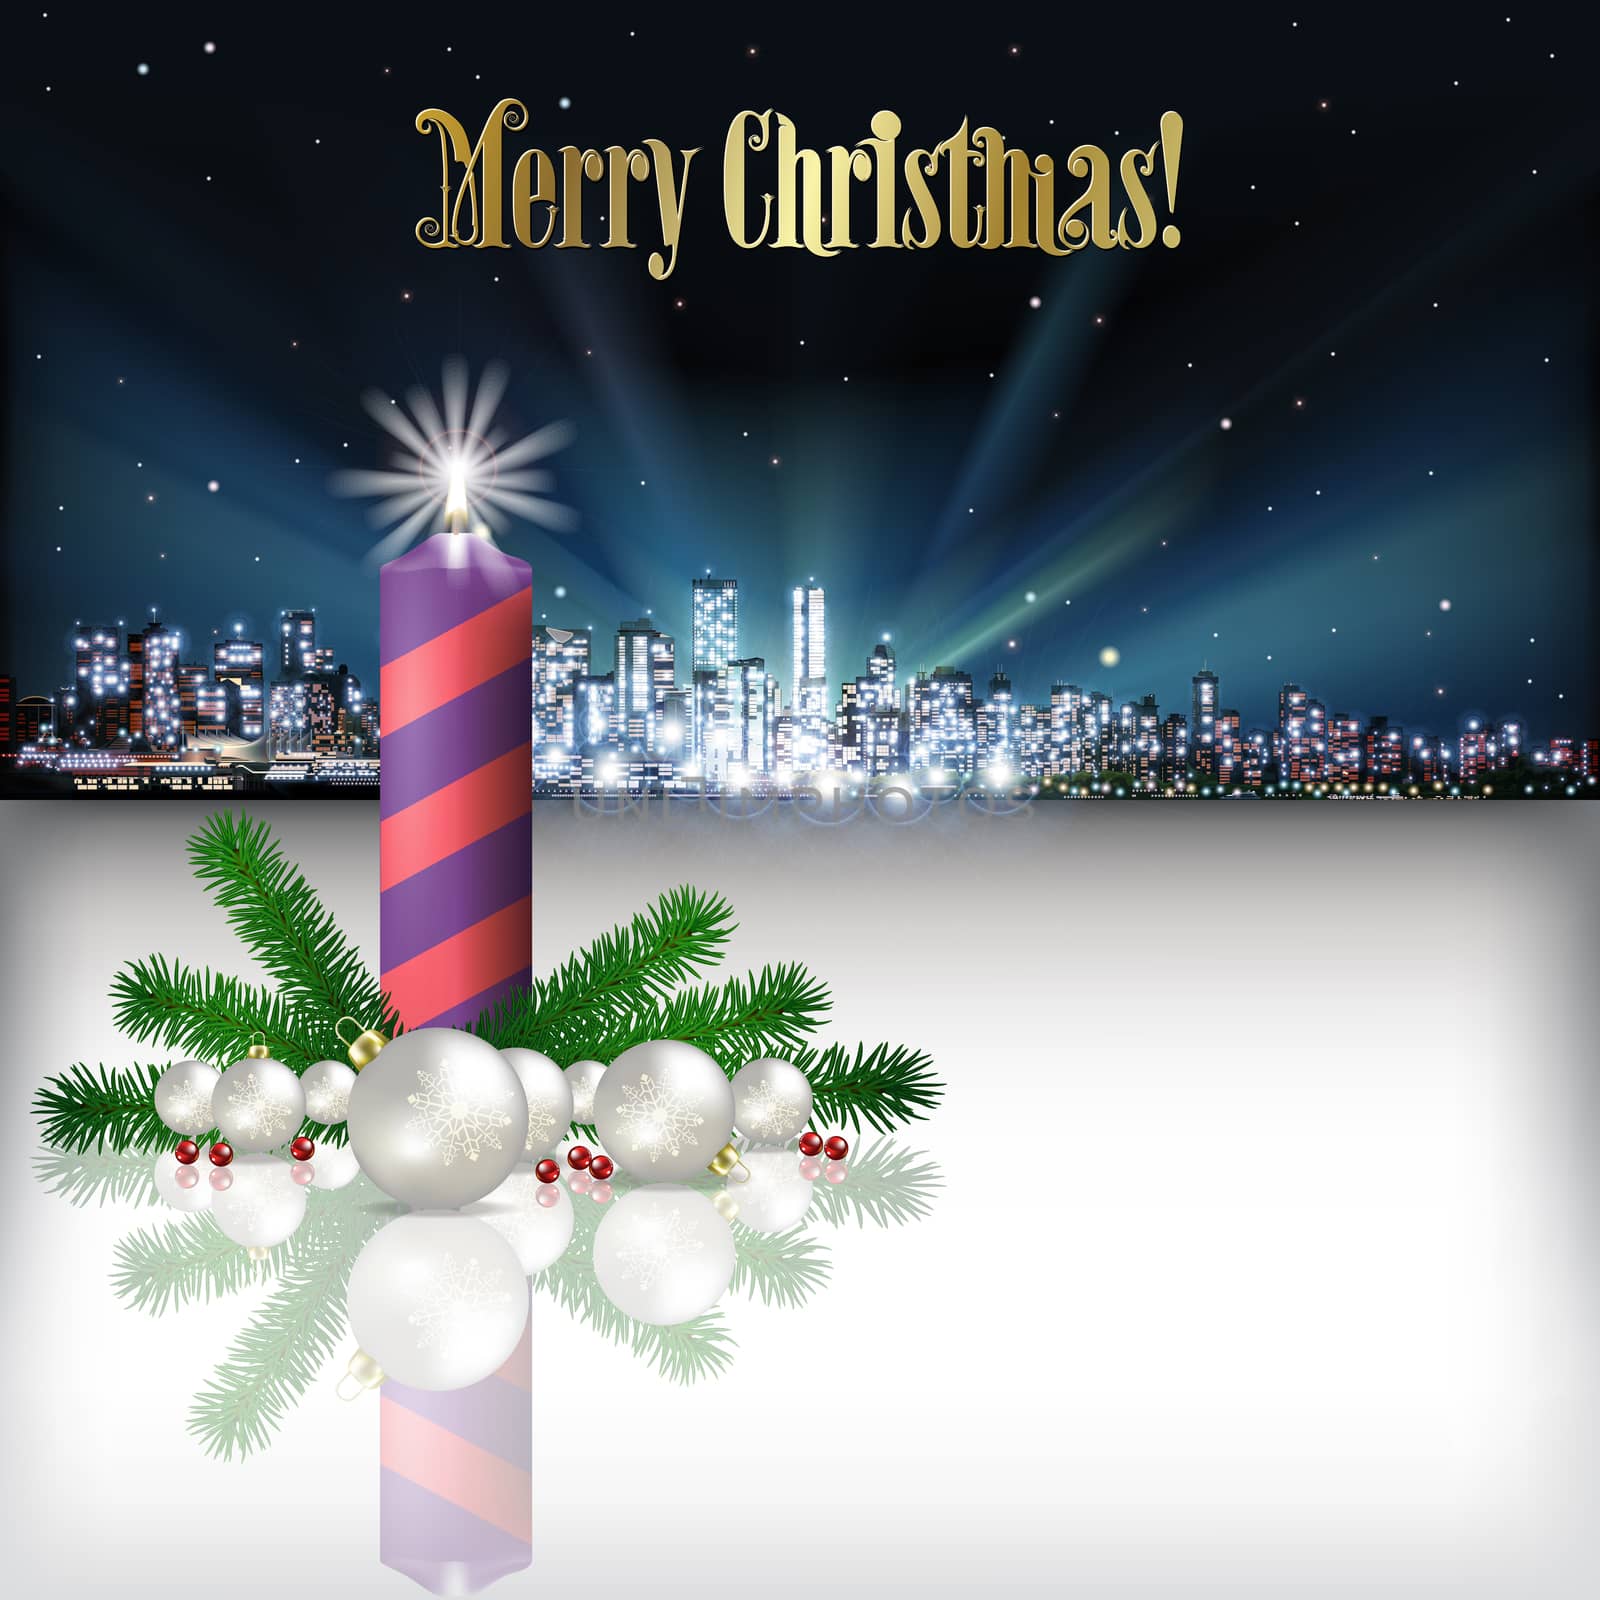 Abstract Christmas vector illustration with silhouette of city and candle